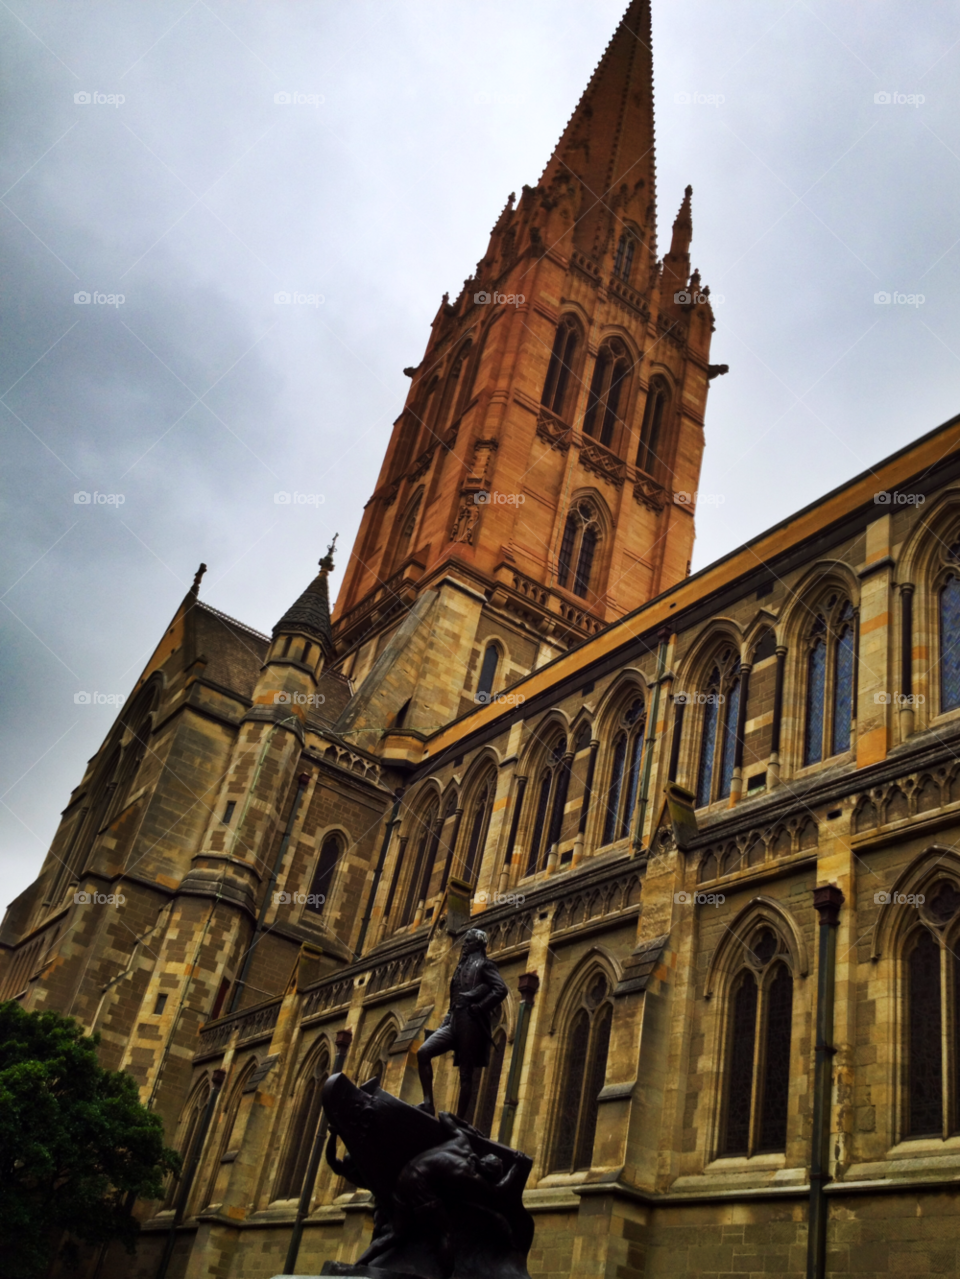 church tower cathedral melbourne by ColinE